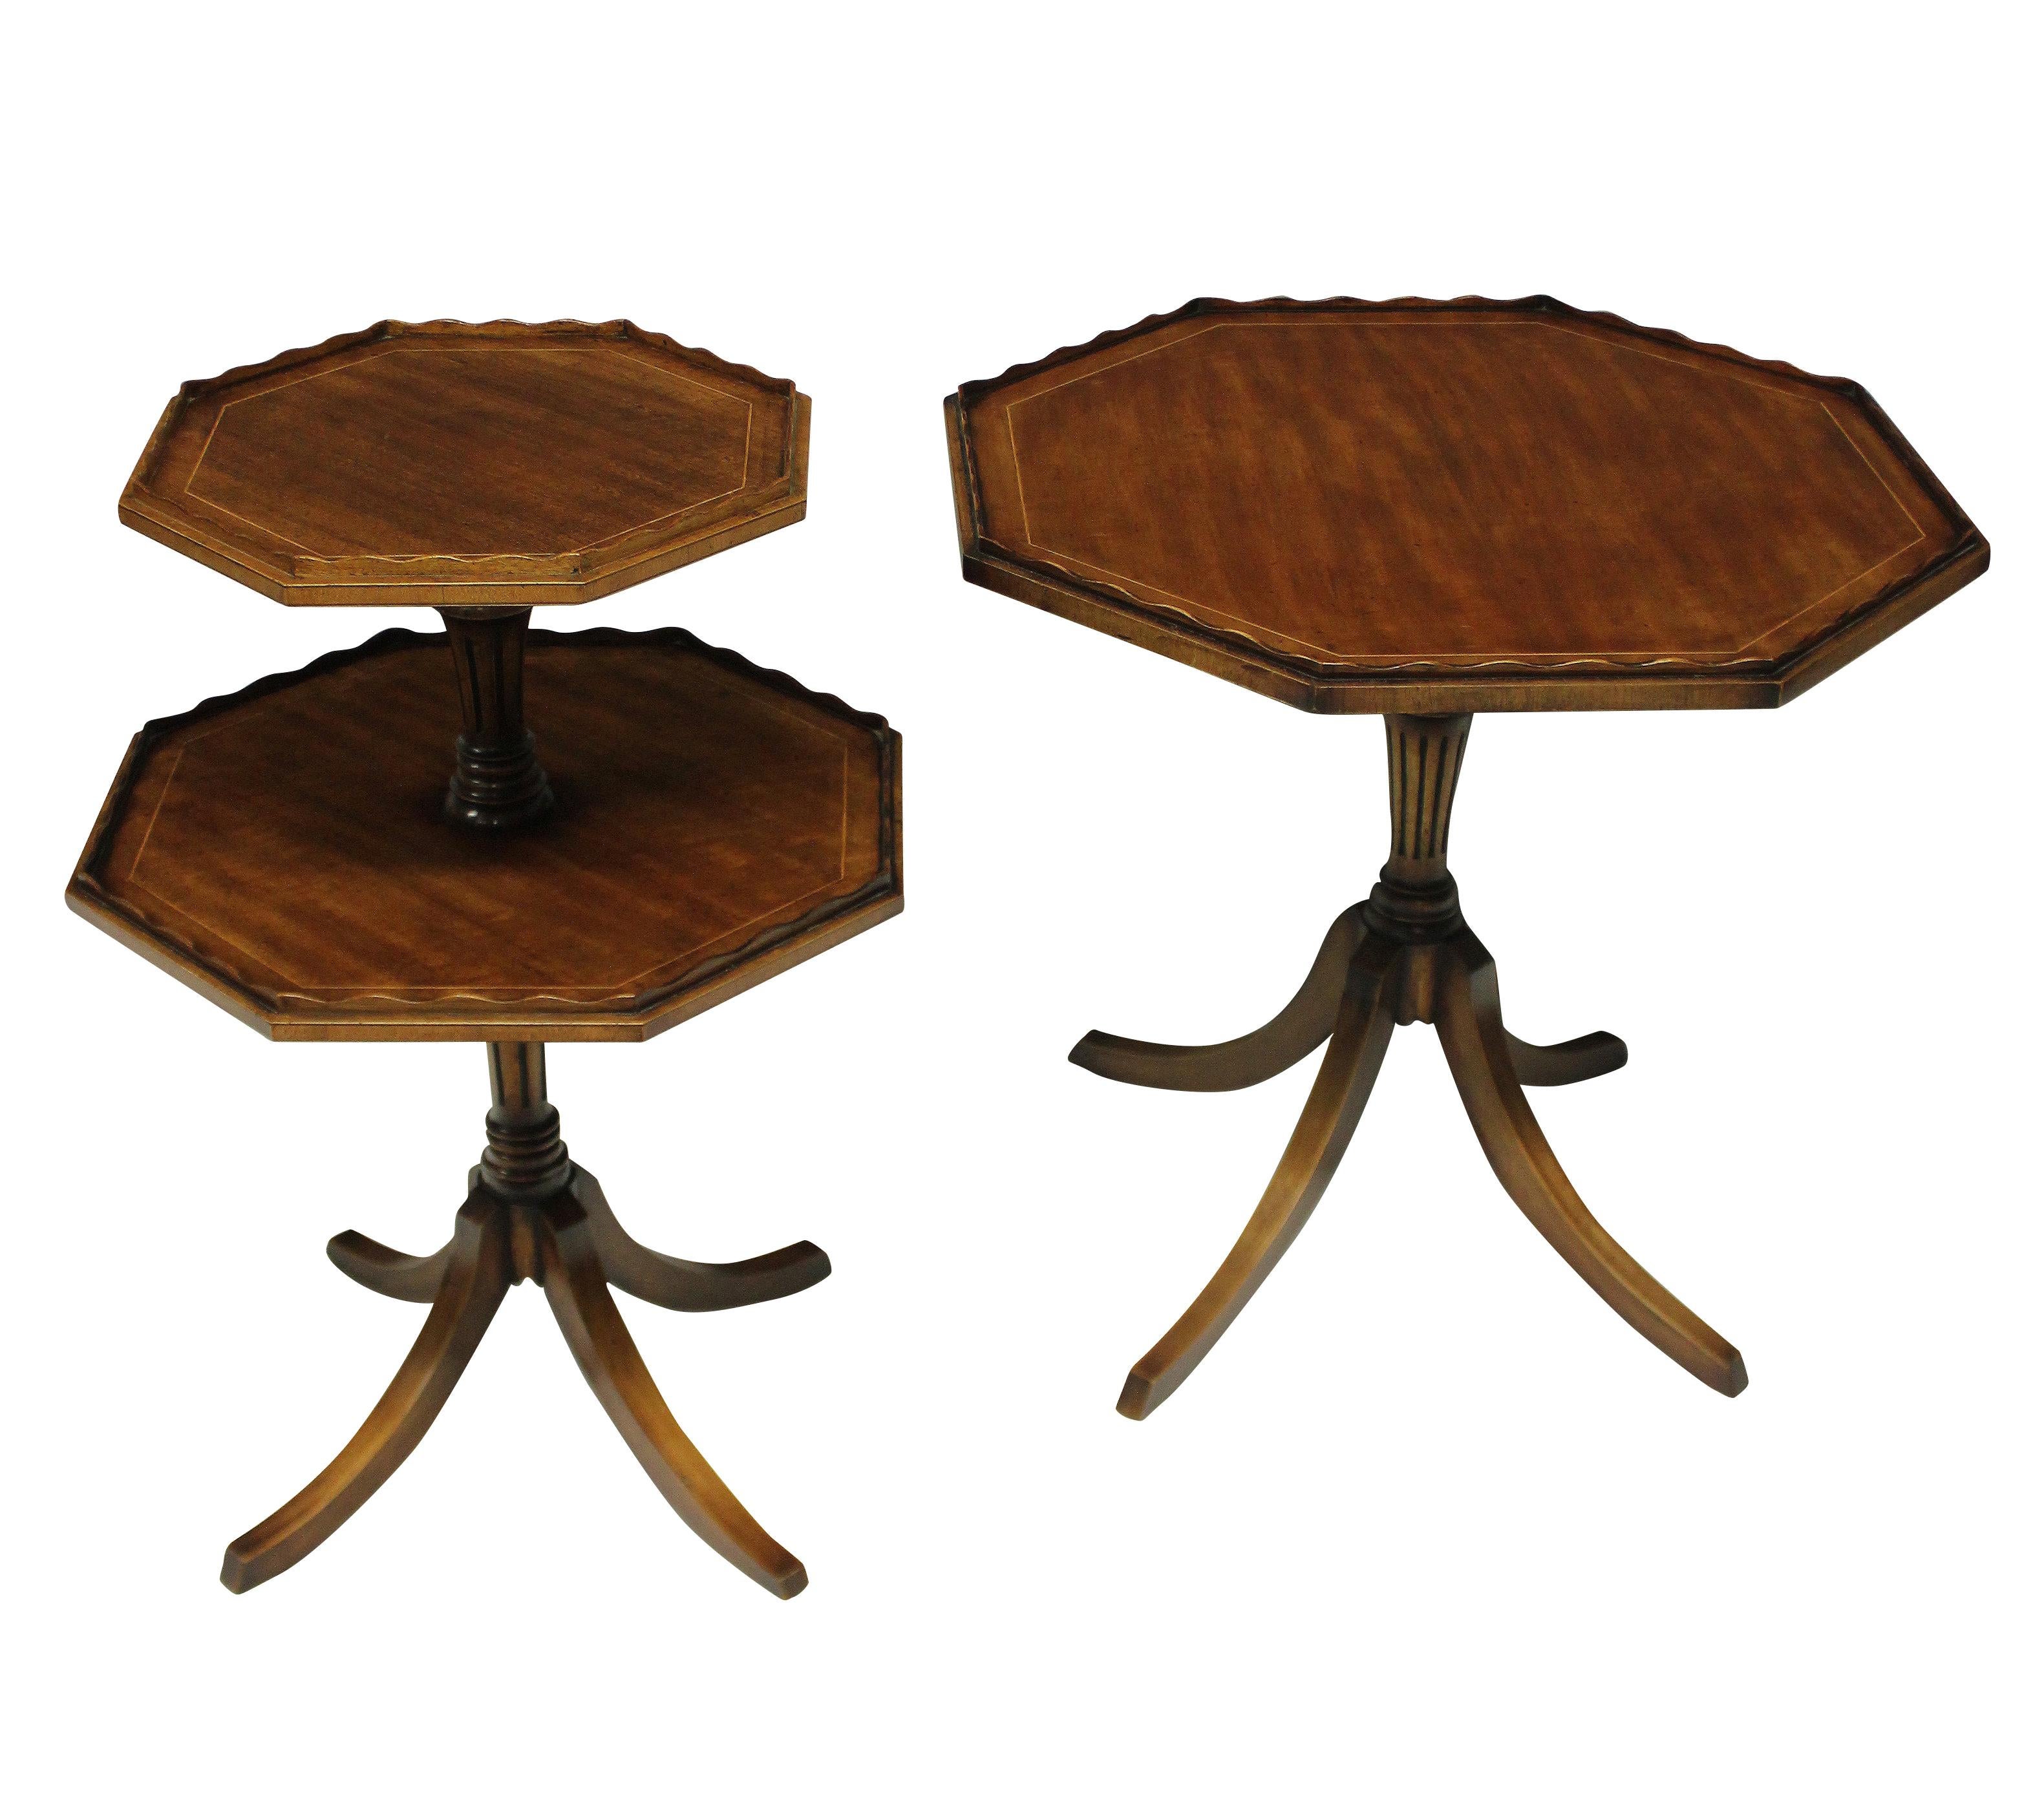 A pair of English mahogany side tables with good patina, each with an octagonal top with pie crust edge. One table with a tilt-top and the other with two tiers, both with box wood stringing.
Measures: 56cm high x 60 diameter (tilt-top ) x 68cm high